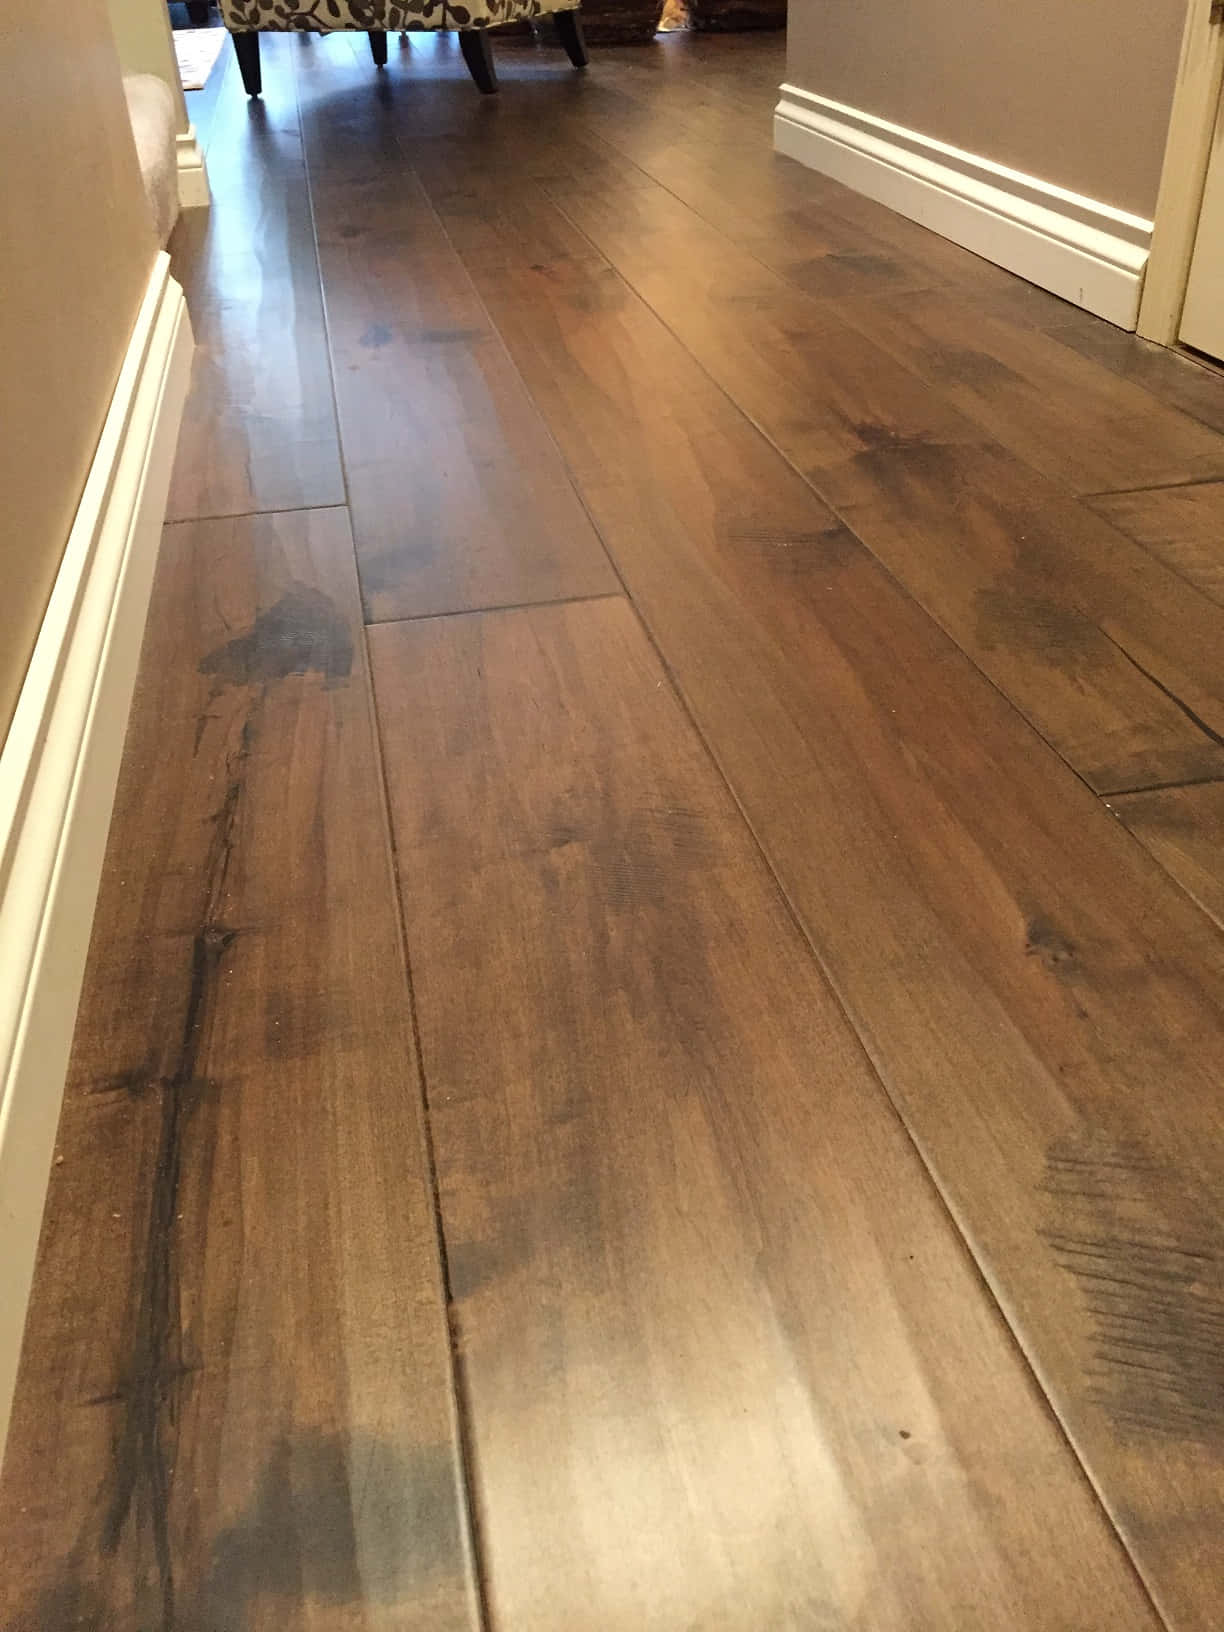 "A beautiful and natural wooden floor in a home setting."